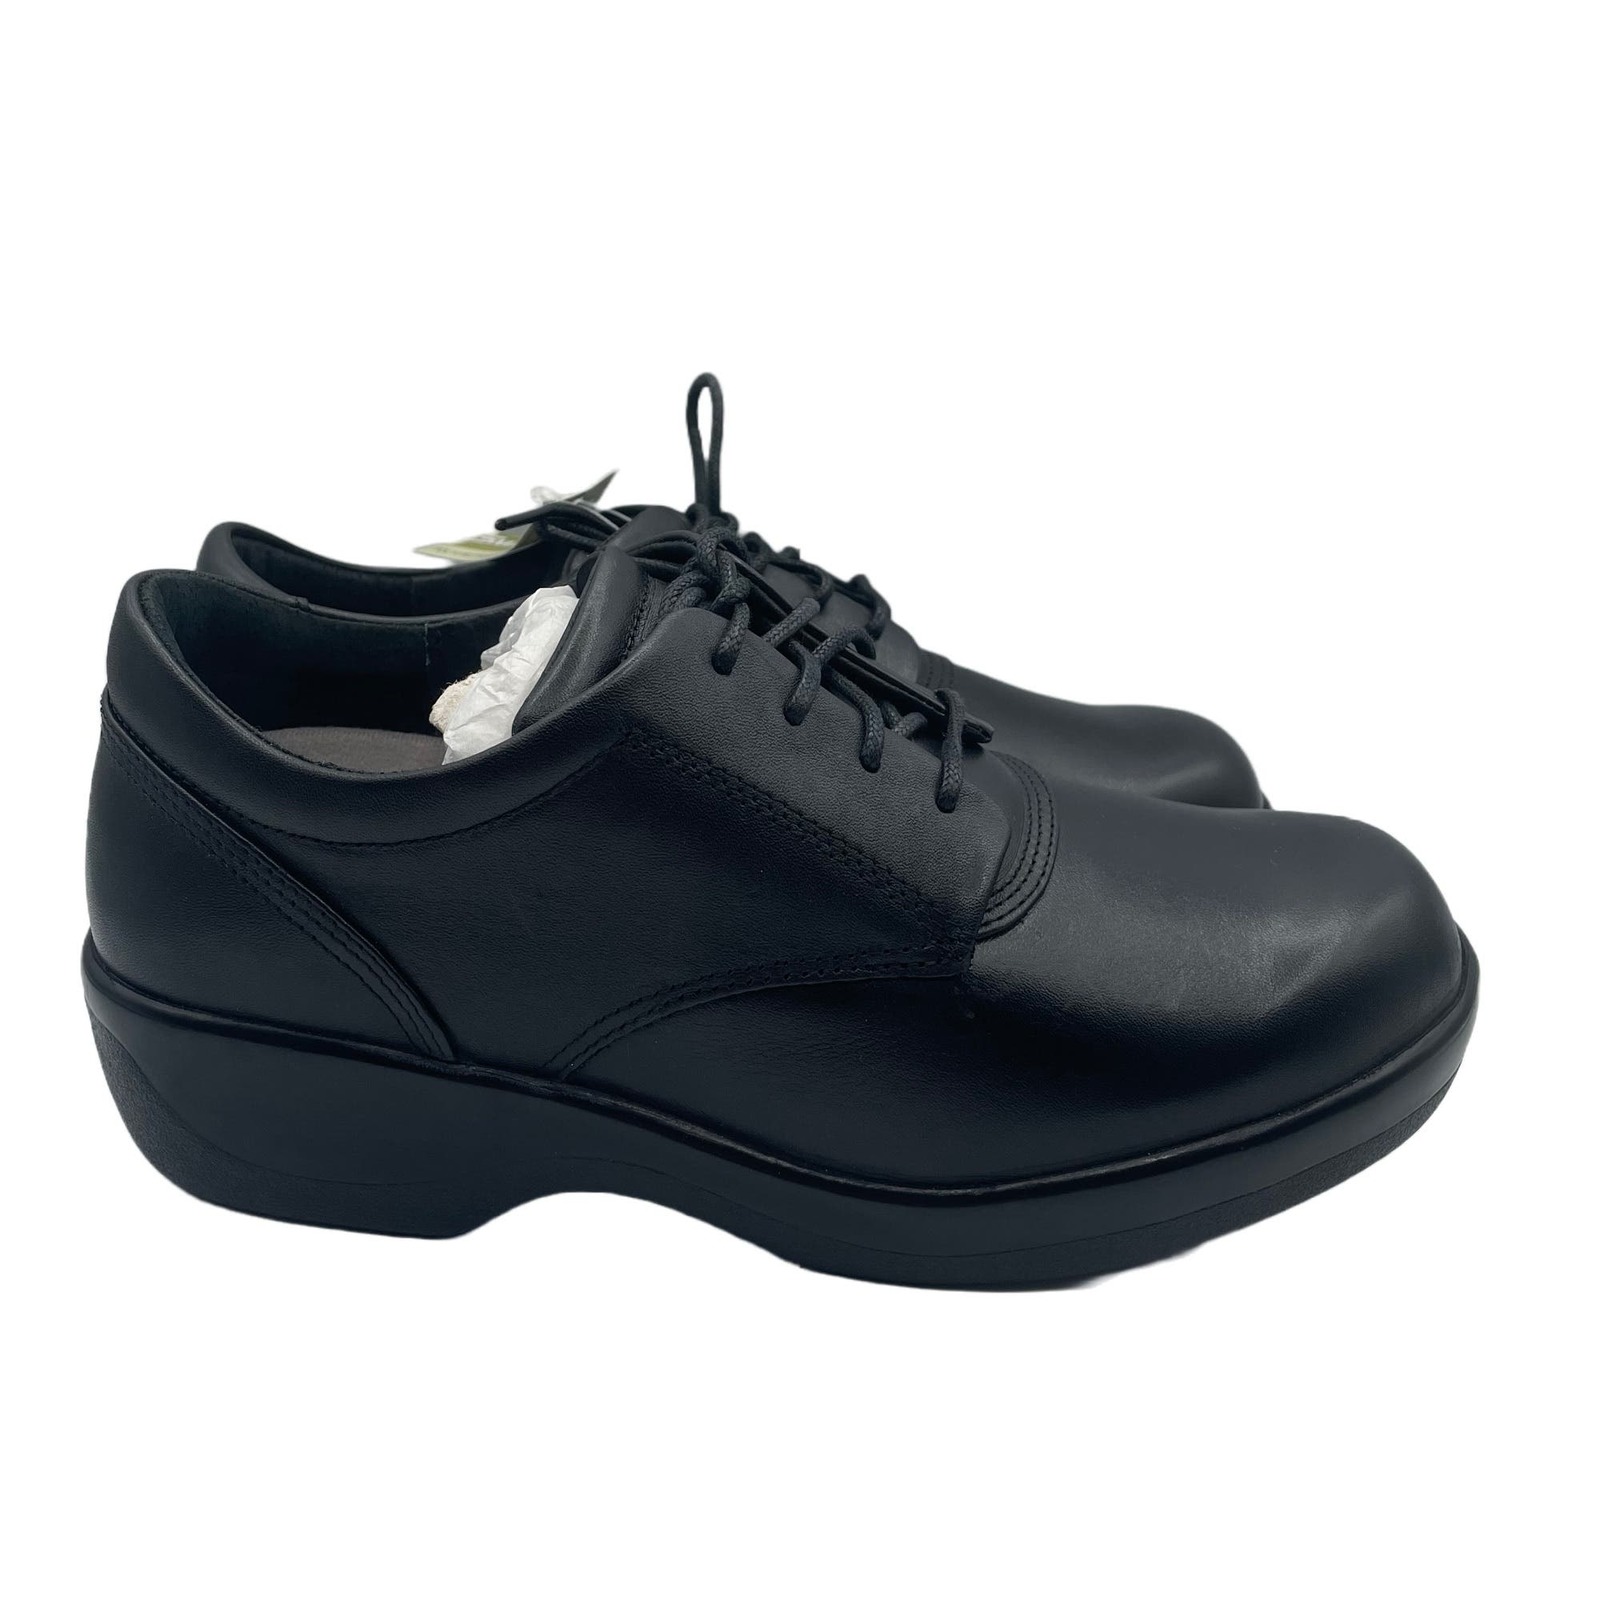 Primary image for Apex B2000W Ambulator Lace Up Oxford Orthopedic Shoes Womens 10.5 X Wide